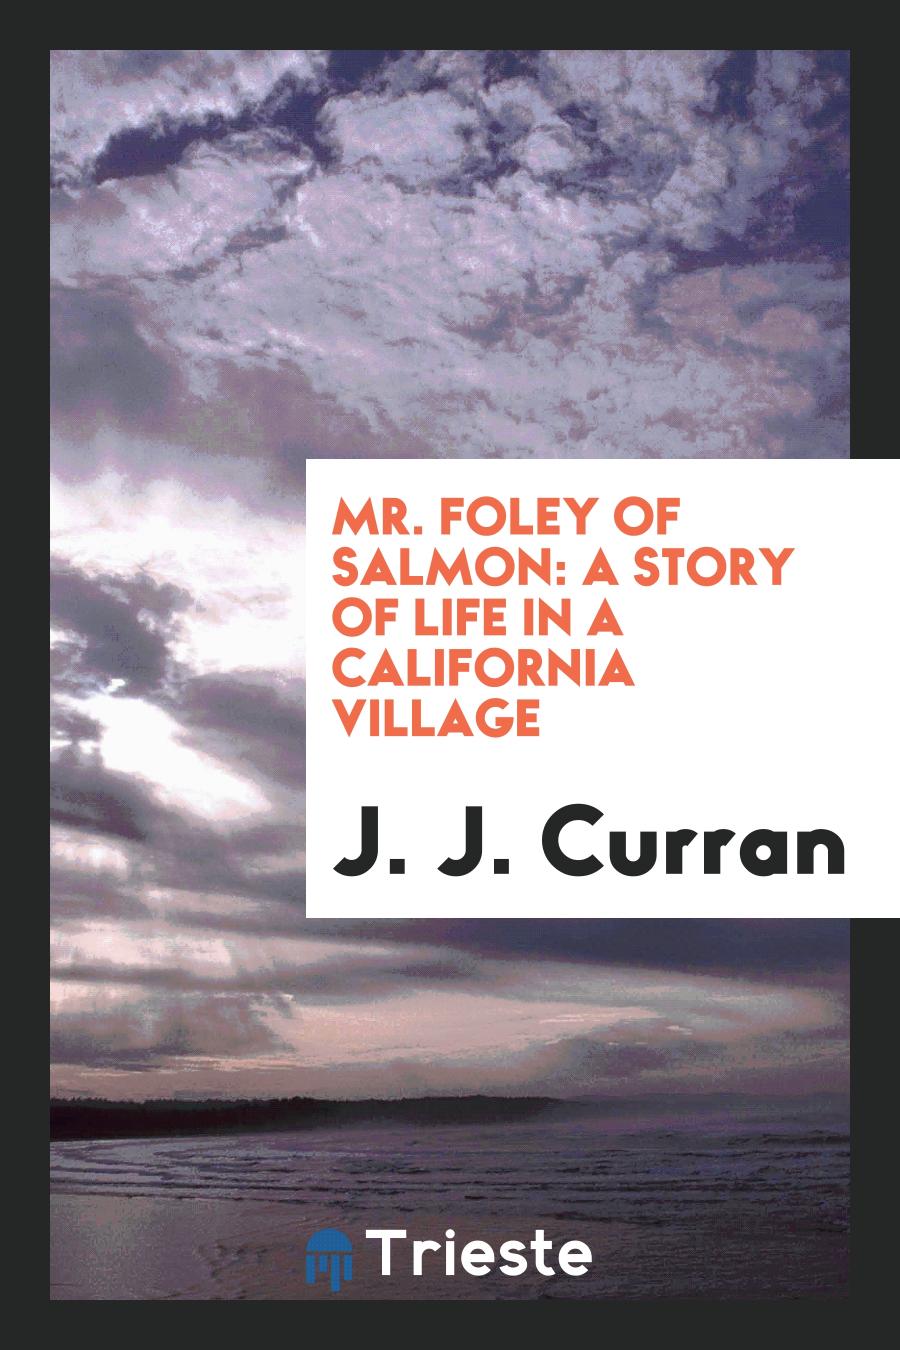 Mr. Foley of Salmon: A Story of Life in a California Village